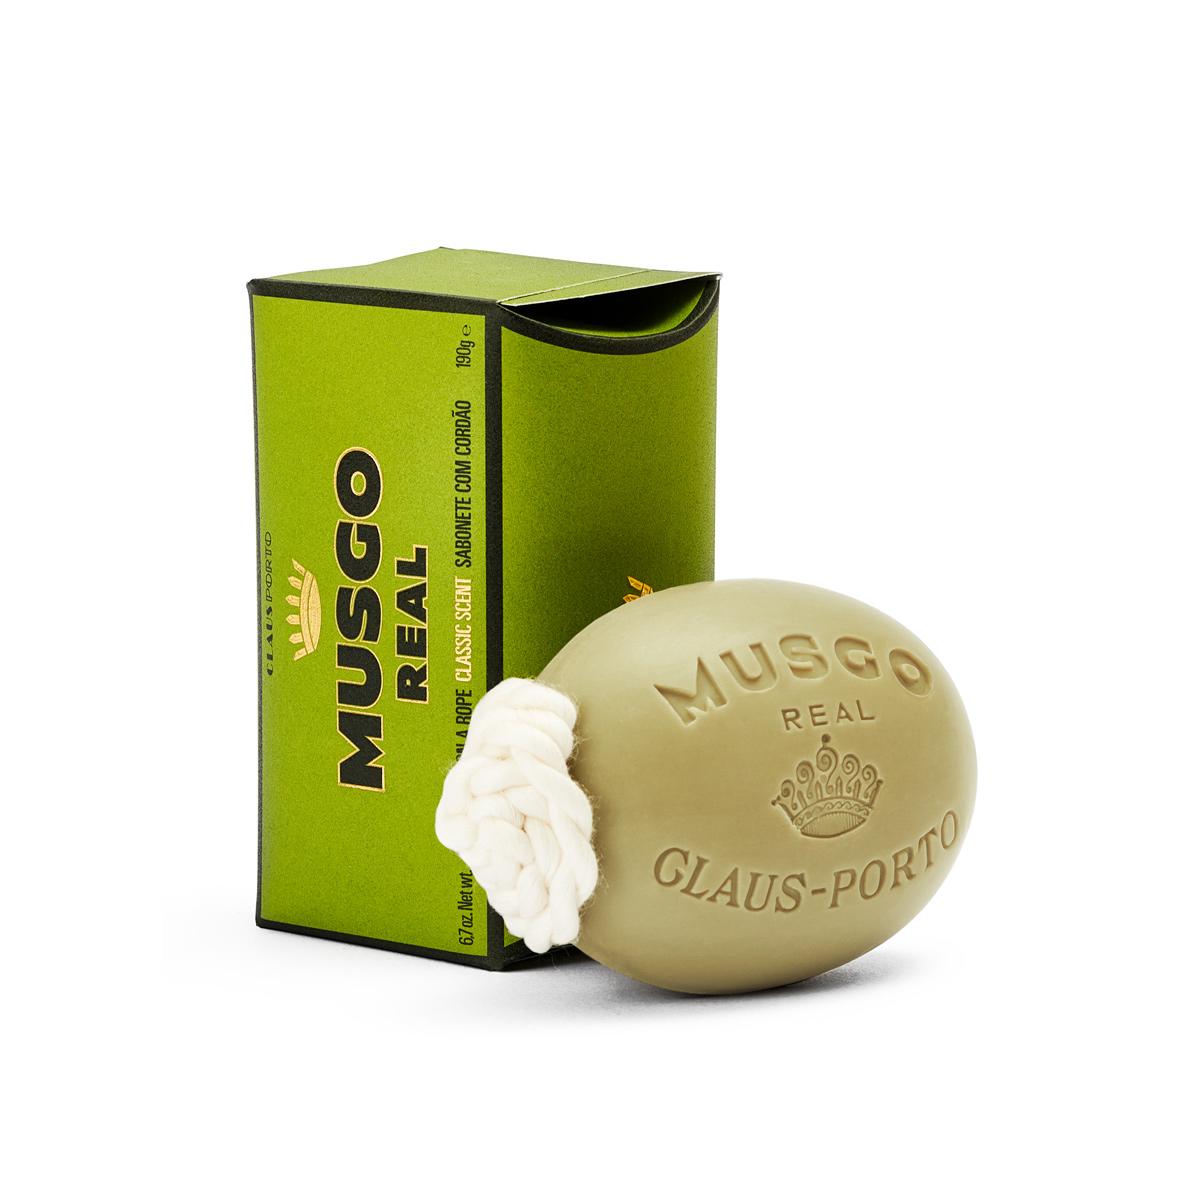 Musgo Real Soap on a Rope Classic Scent (190g)